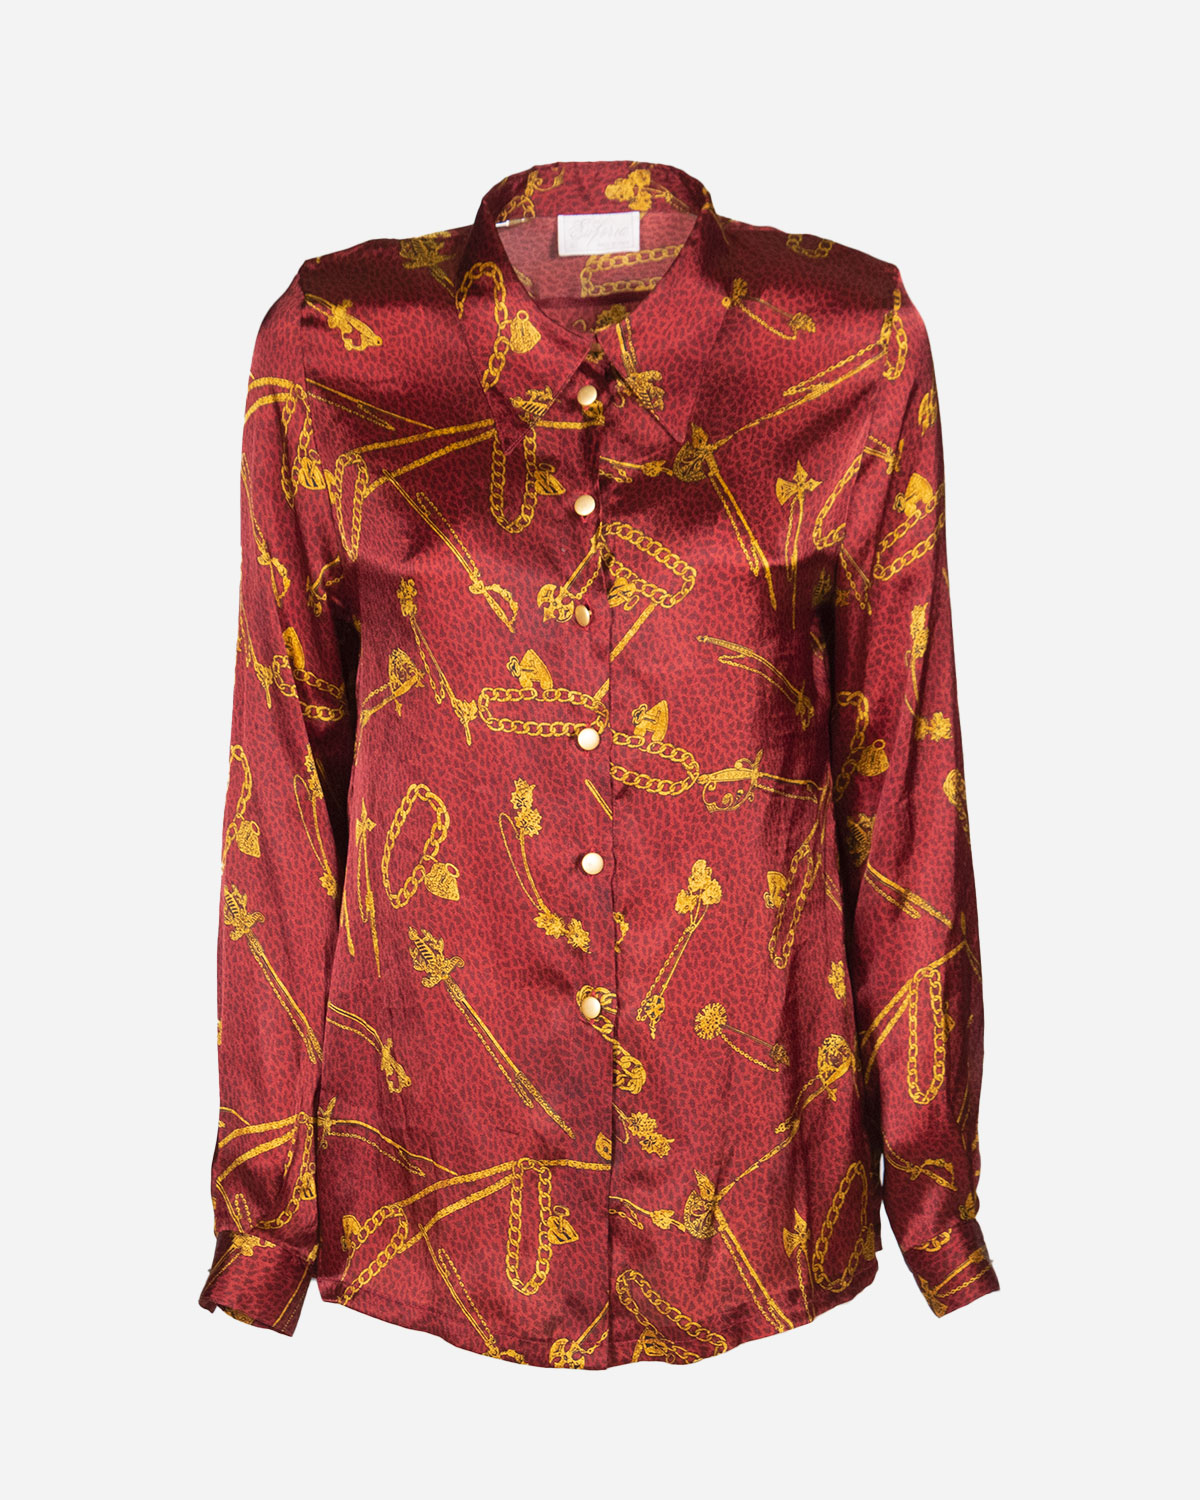 Women’s baroque patterned shirts: 4 pieces